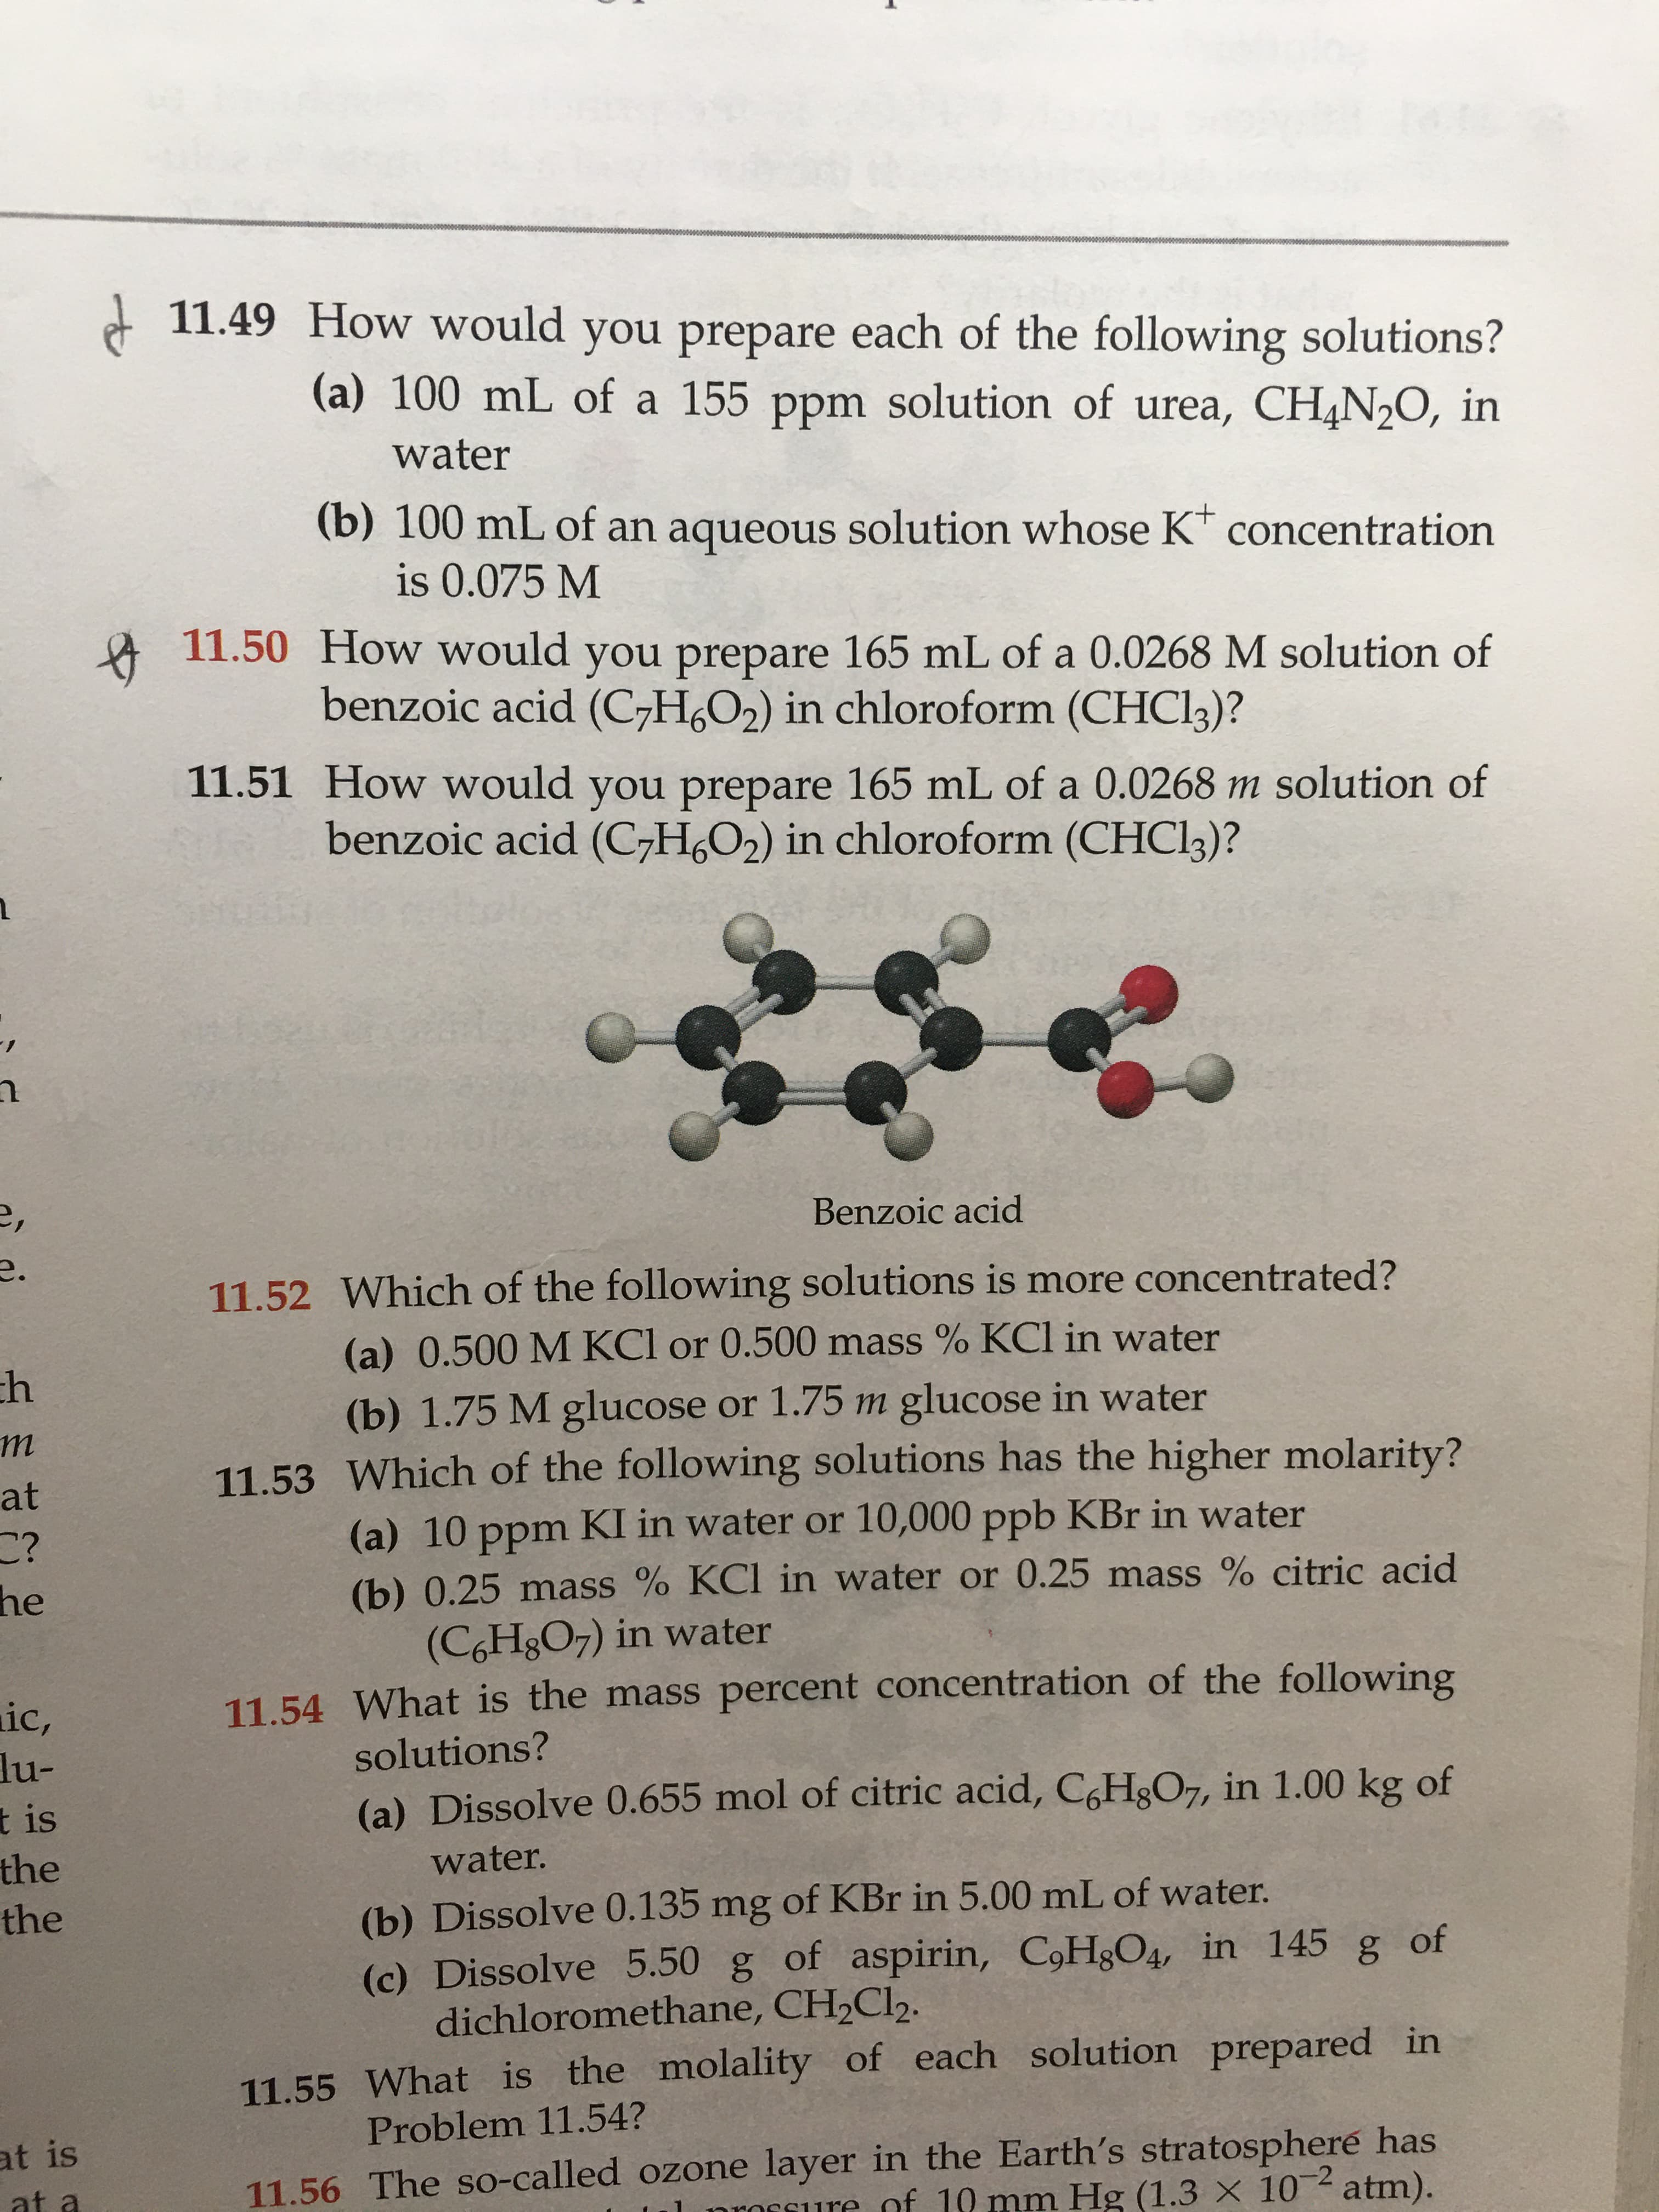 11.49 How would you prepare each of the following solutions?
(a) 100 mL of a 155 ppm solution of urea, CH4N2O, in
water
(b) 100 mL of an aqueous solution whose K* concentration
is 0.075 M
11.50 How would you prepare 165 mL of a 0.0268 M solution of
benzoic acid (C-H,O2) in chloroform (CHCI3)?
